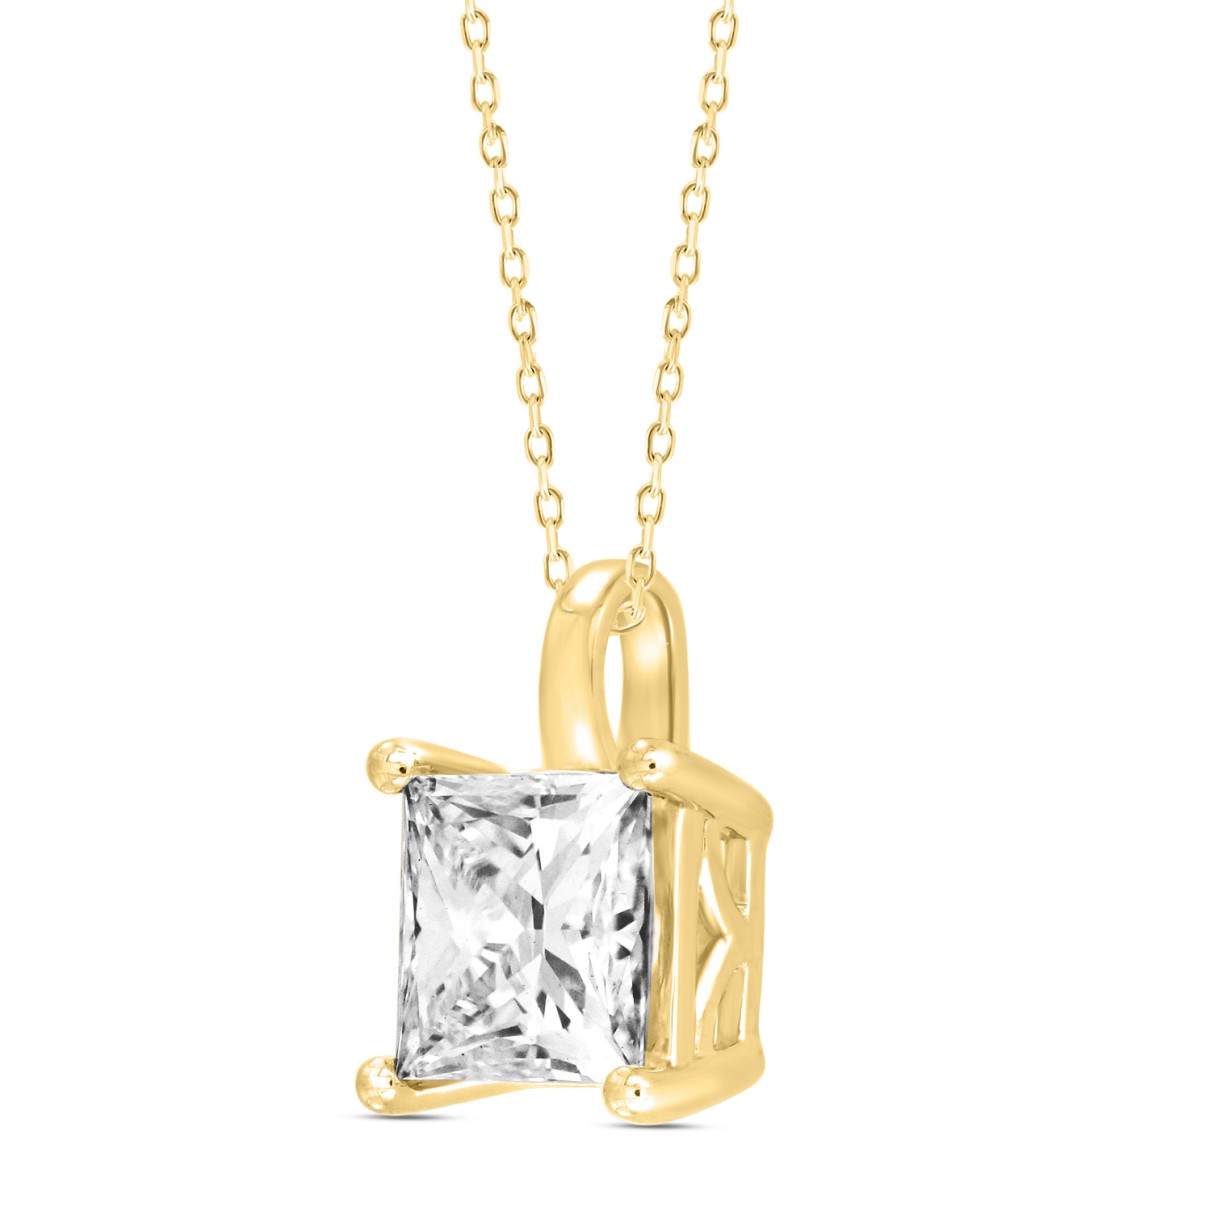 LADIES SOLITAIRE PENDANT WITH CHAIN 1 1/2CT PRINCESS DIAMOND 14K YELLOW GOLD